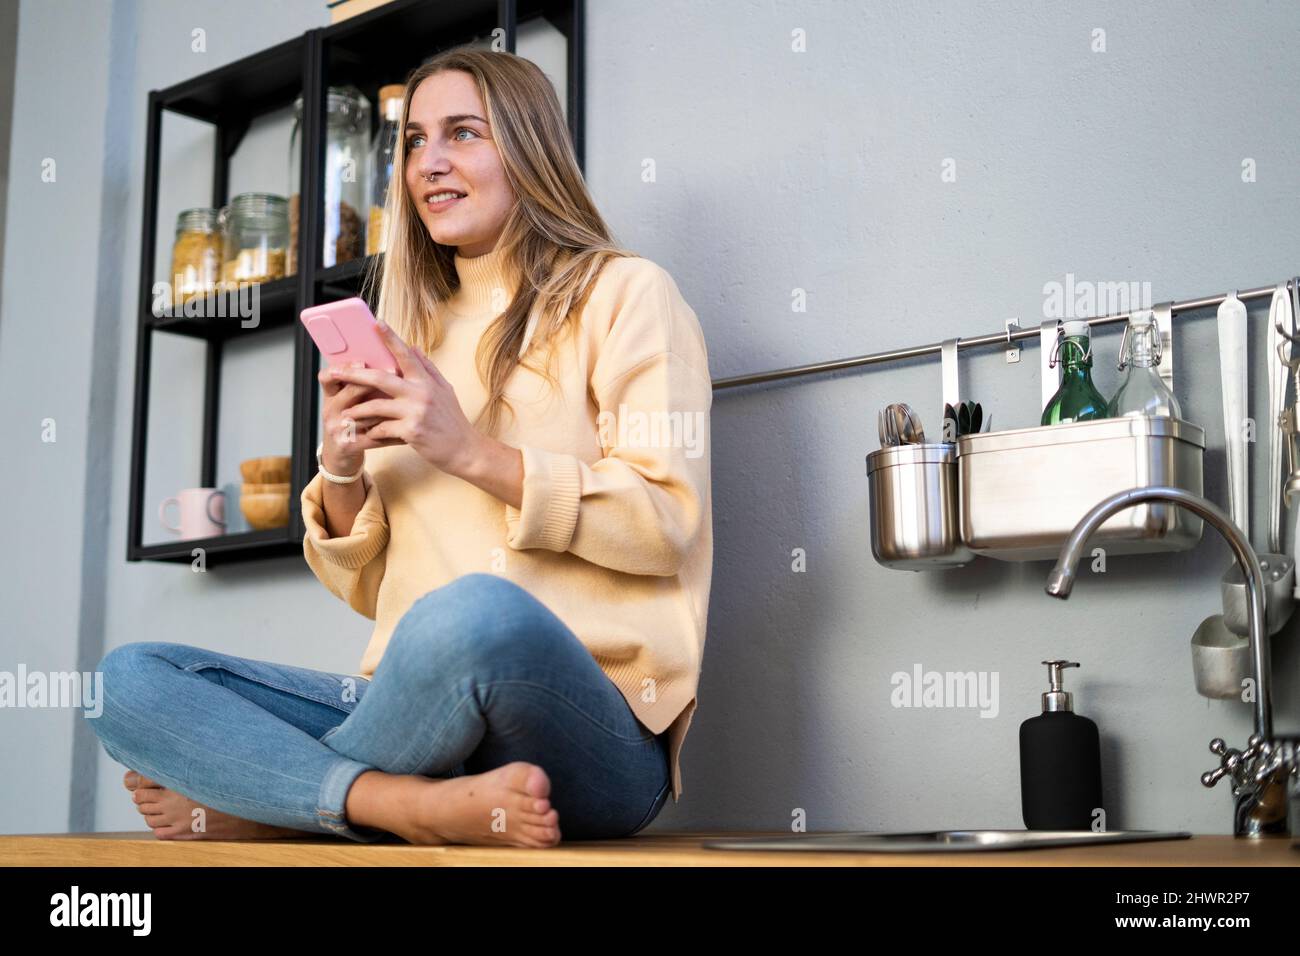 Contemplative woman with smart phone in kitchen Stock Photo